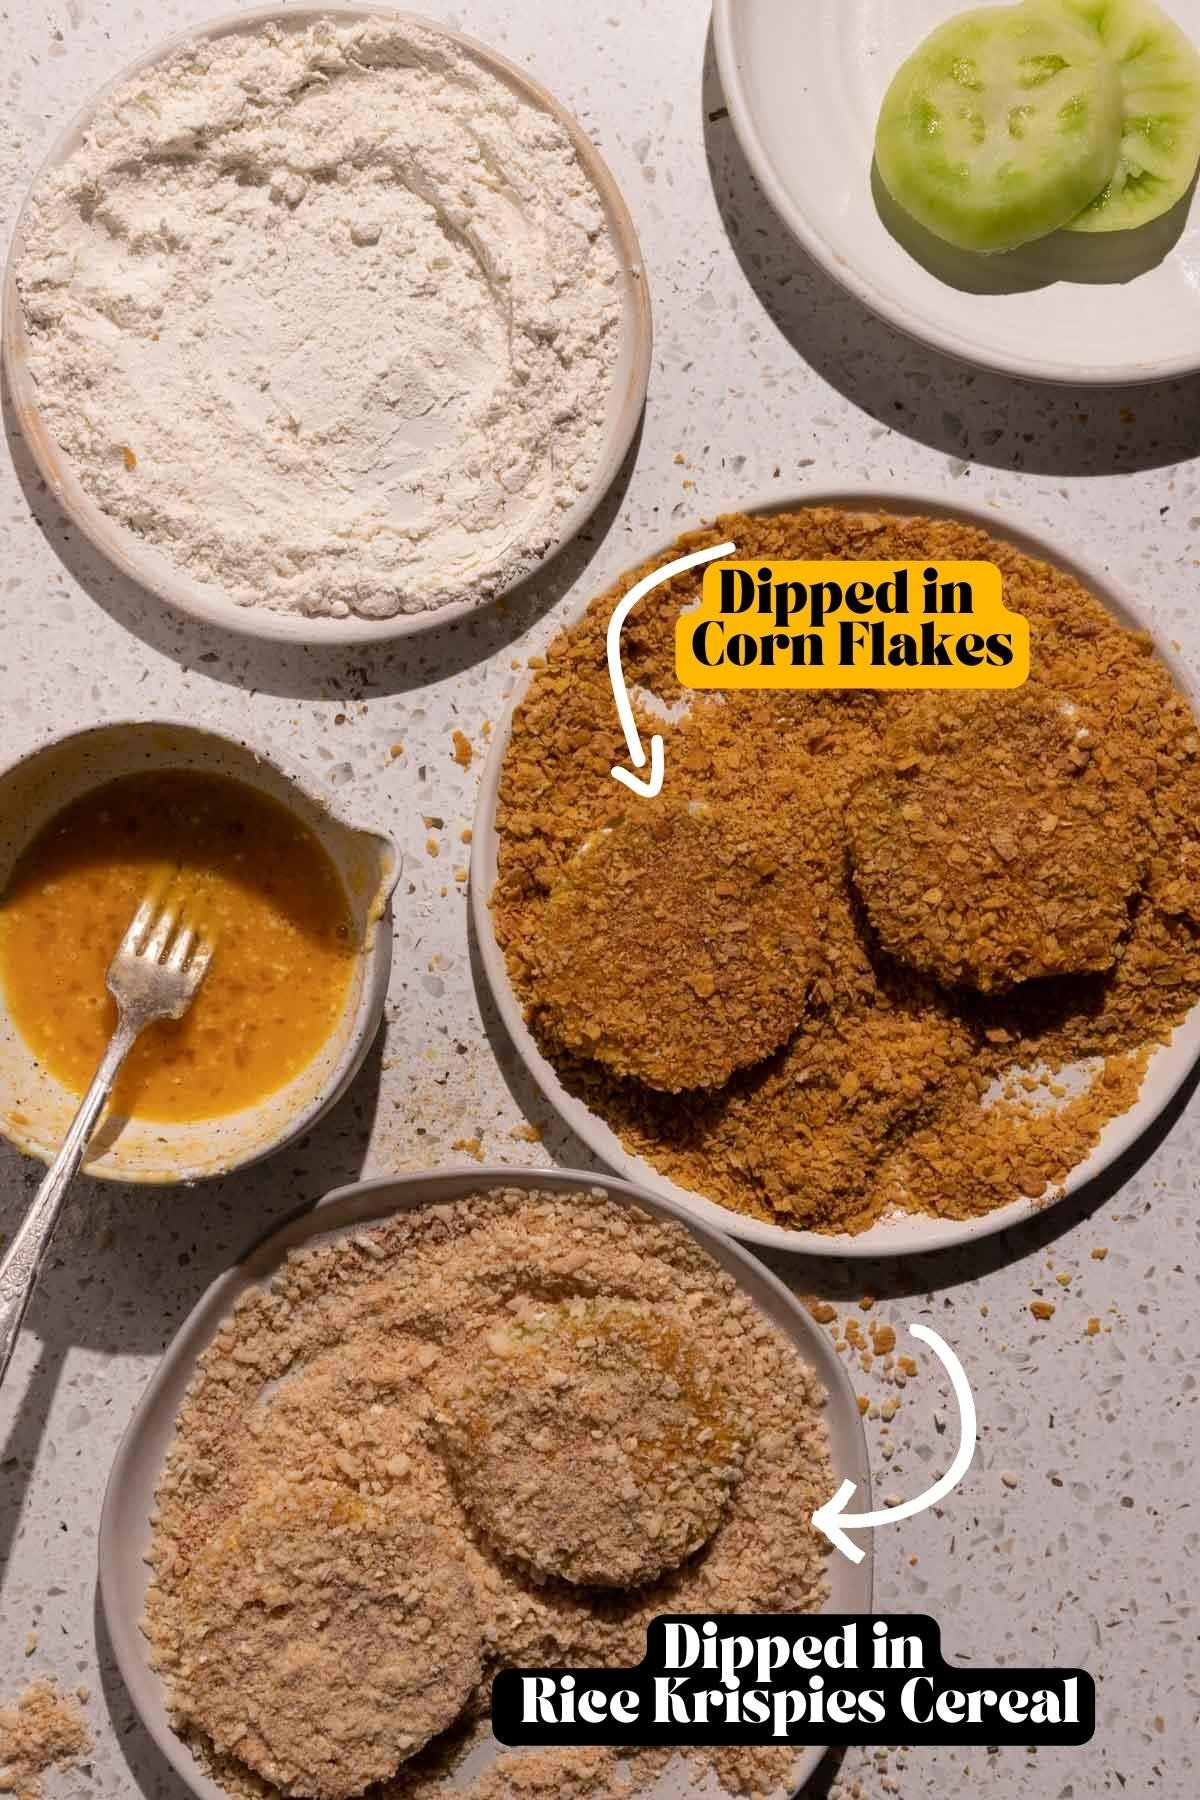 Fried green tomatoes dipped in a cereal crust